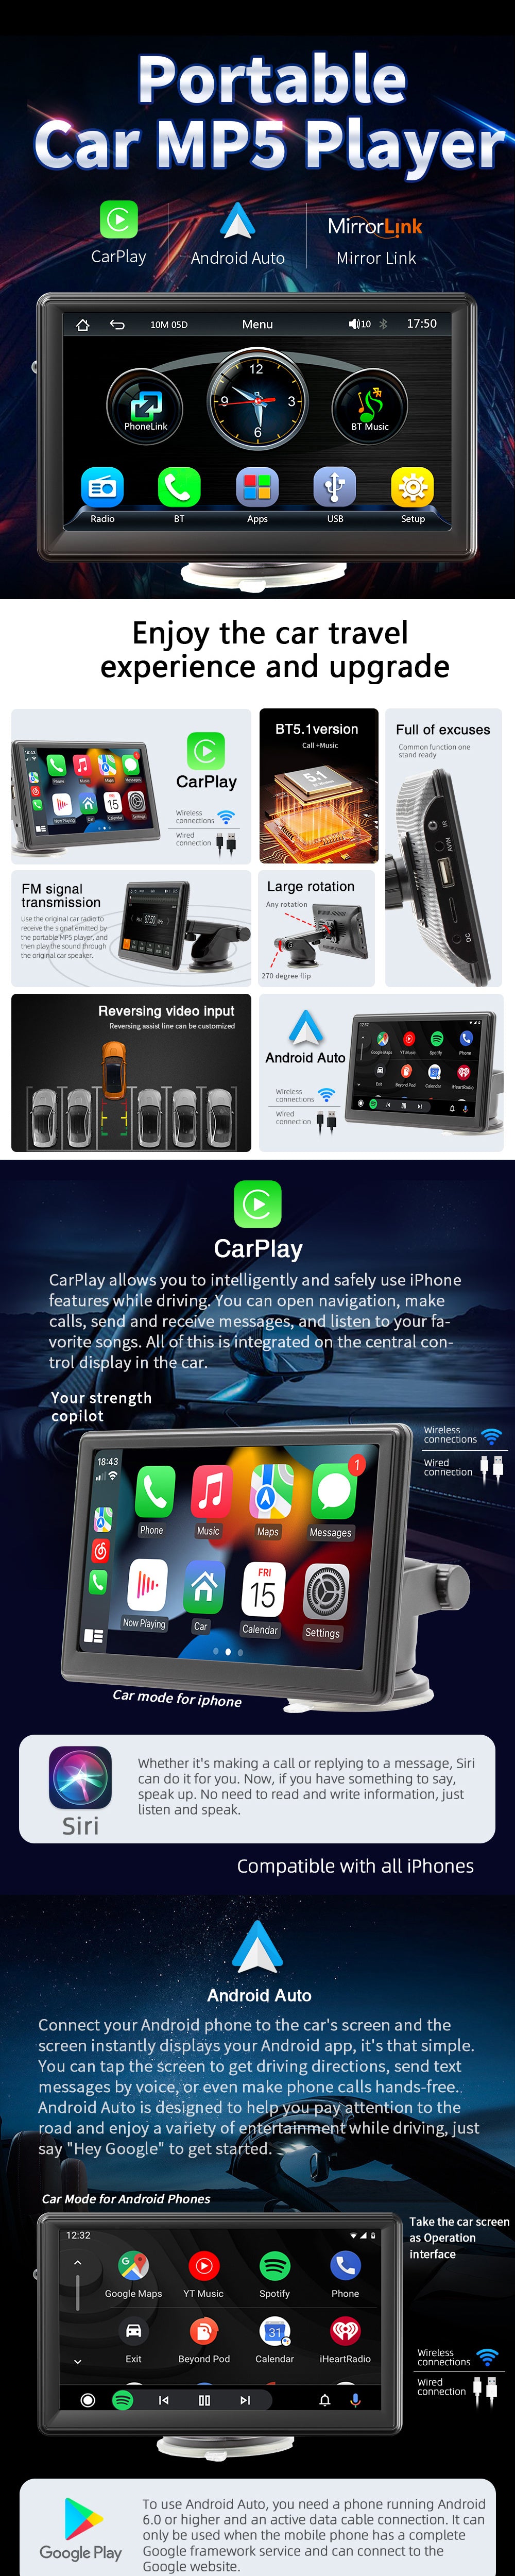 Universal 1din Android Autoradio 6.2 Inch screen with wireless carplay–  EinCar Official Car Stereo Wholesale Factory Manufacturer